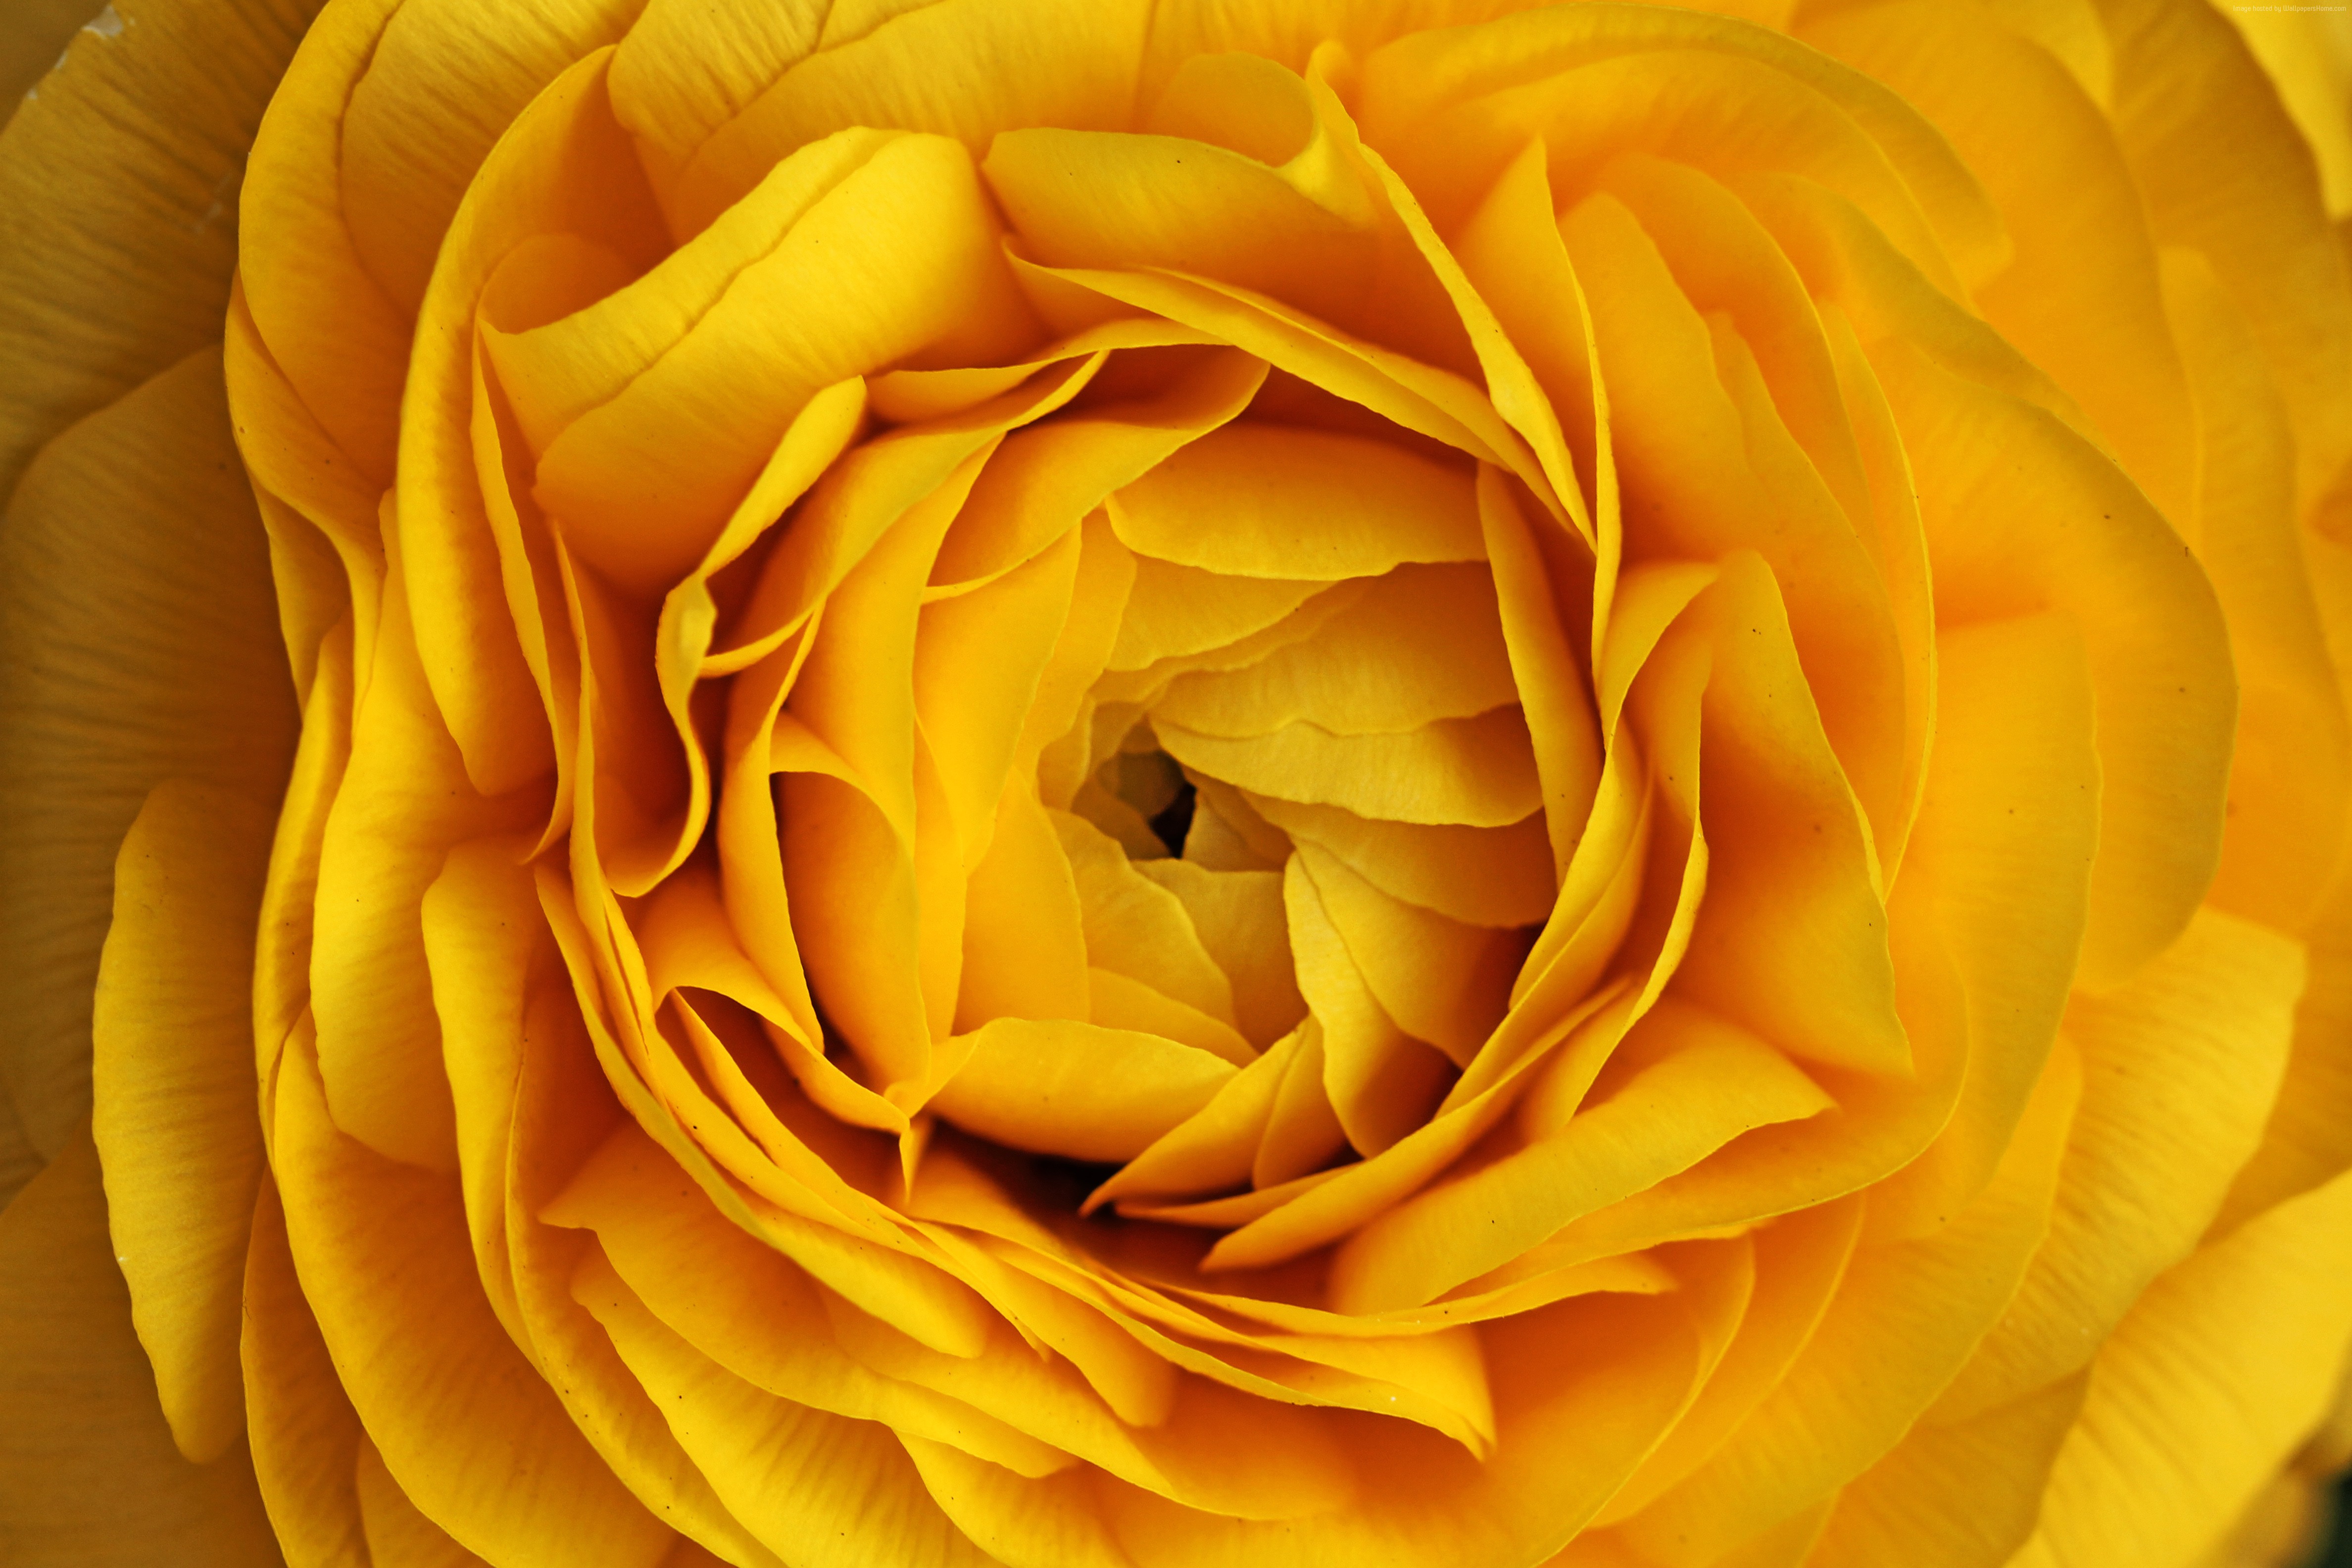 earth, rose, close up, flower, nature, yellow flower, yellow rose, flowers